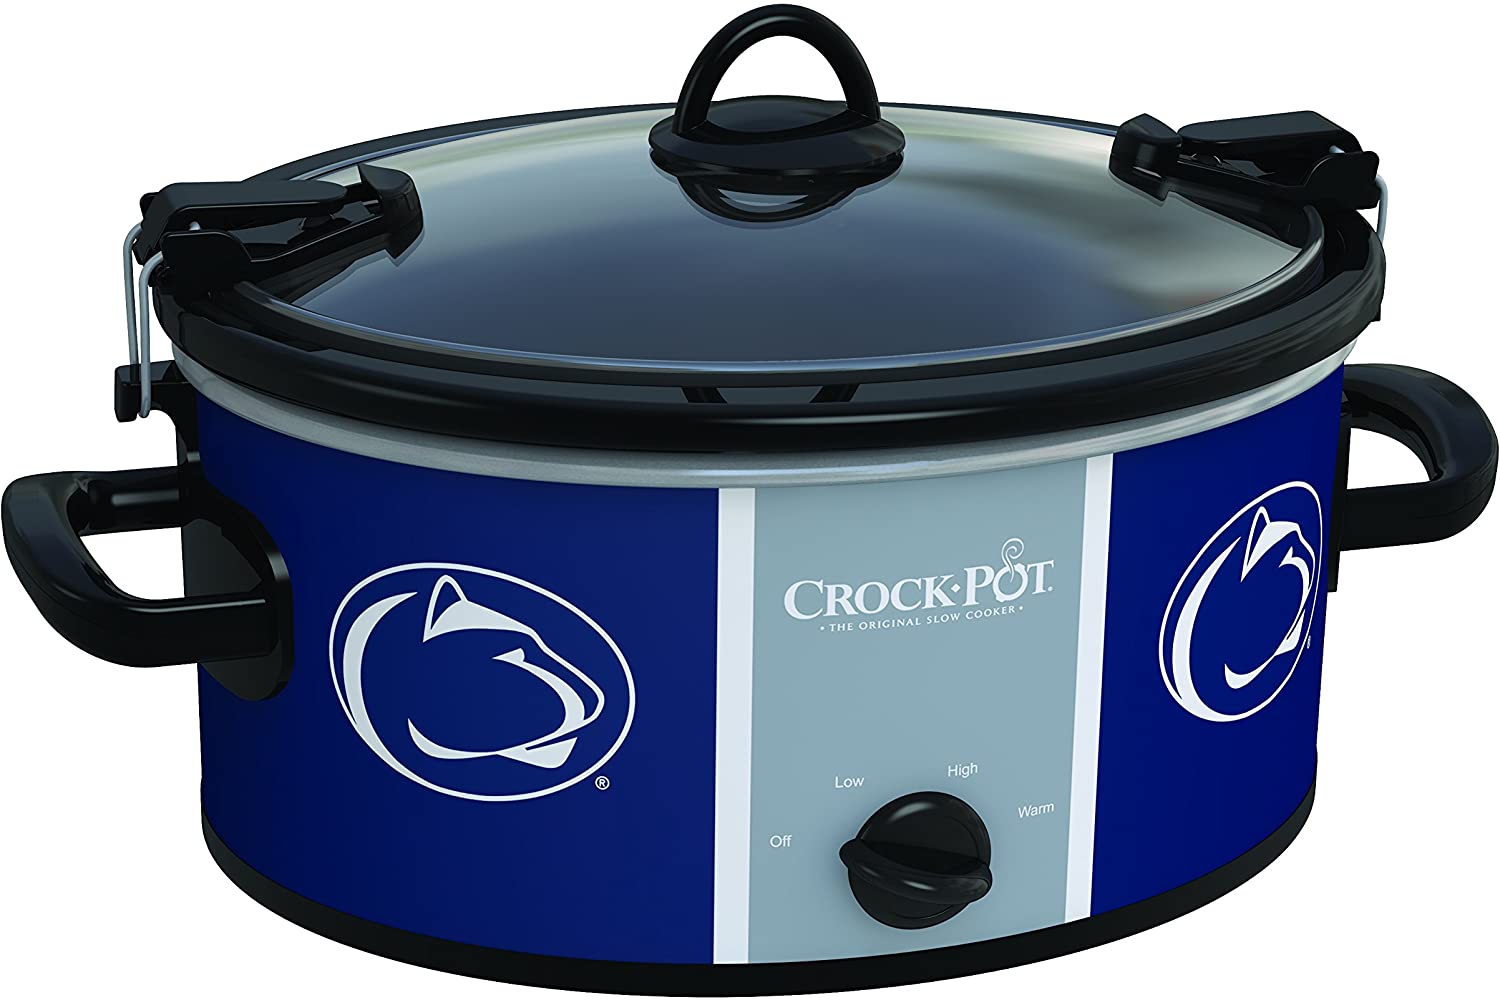 Crock-Pot Penn State Nittany Lions Collegiate 6-Quart Cook & Carry Slow Cooker